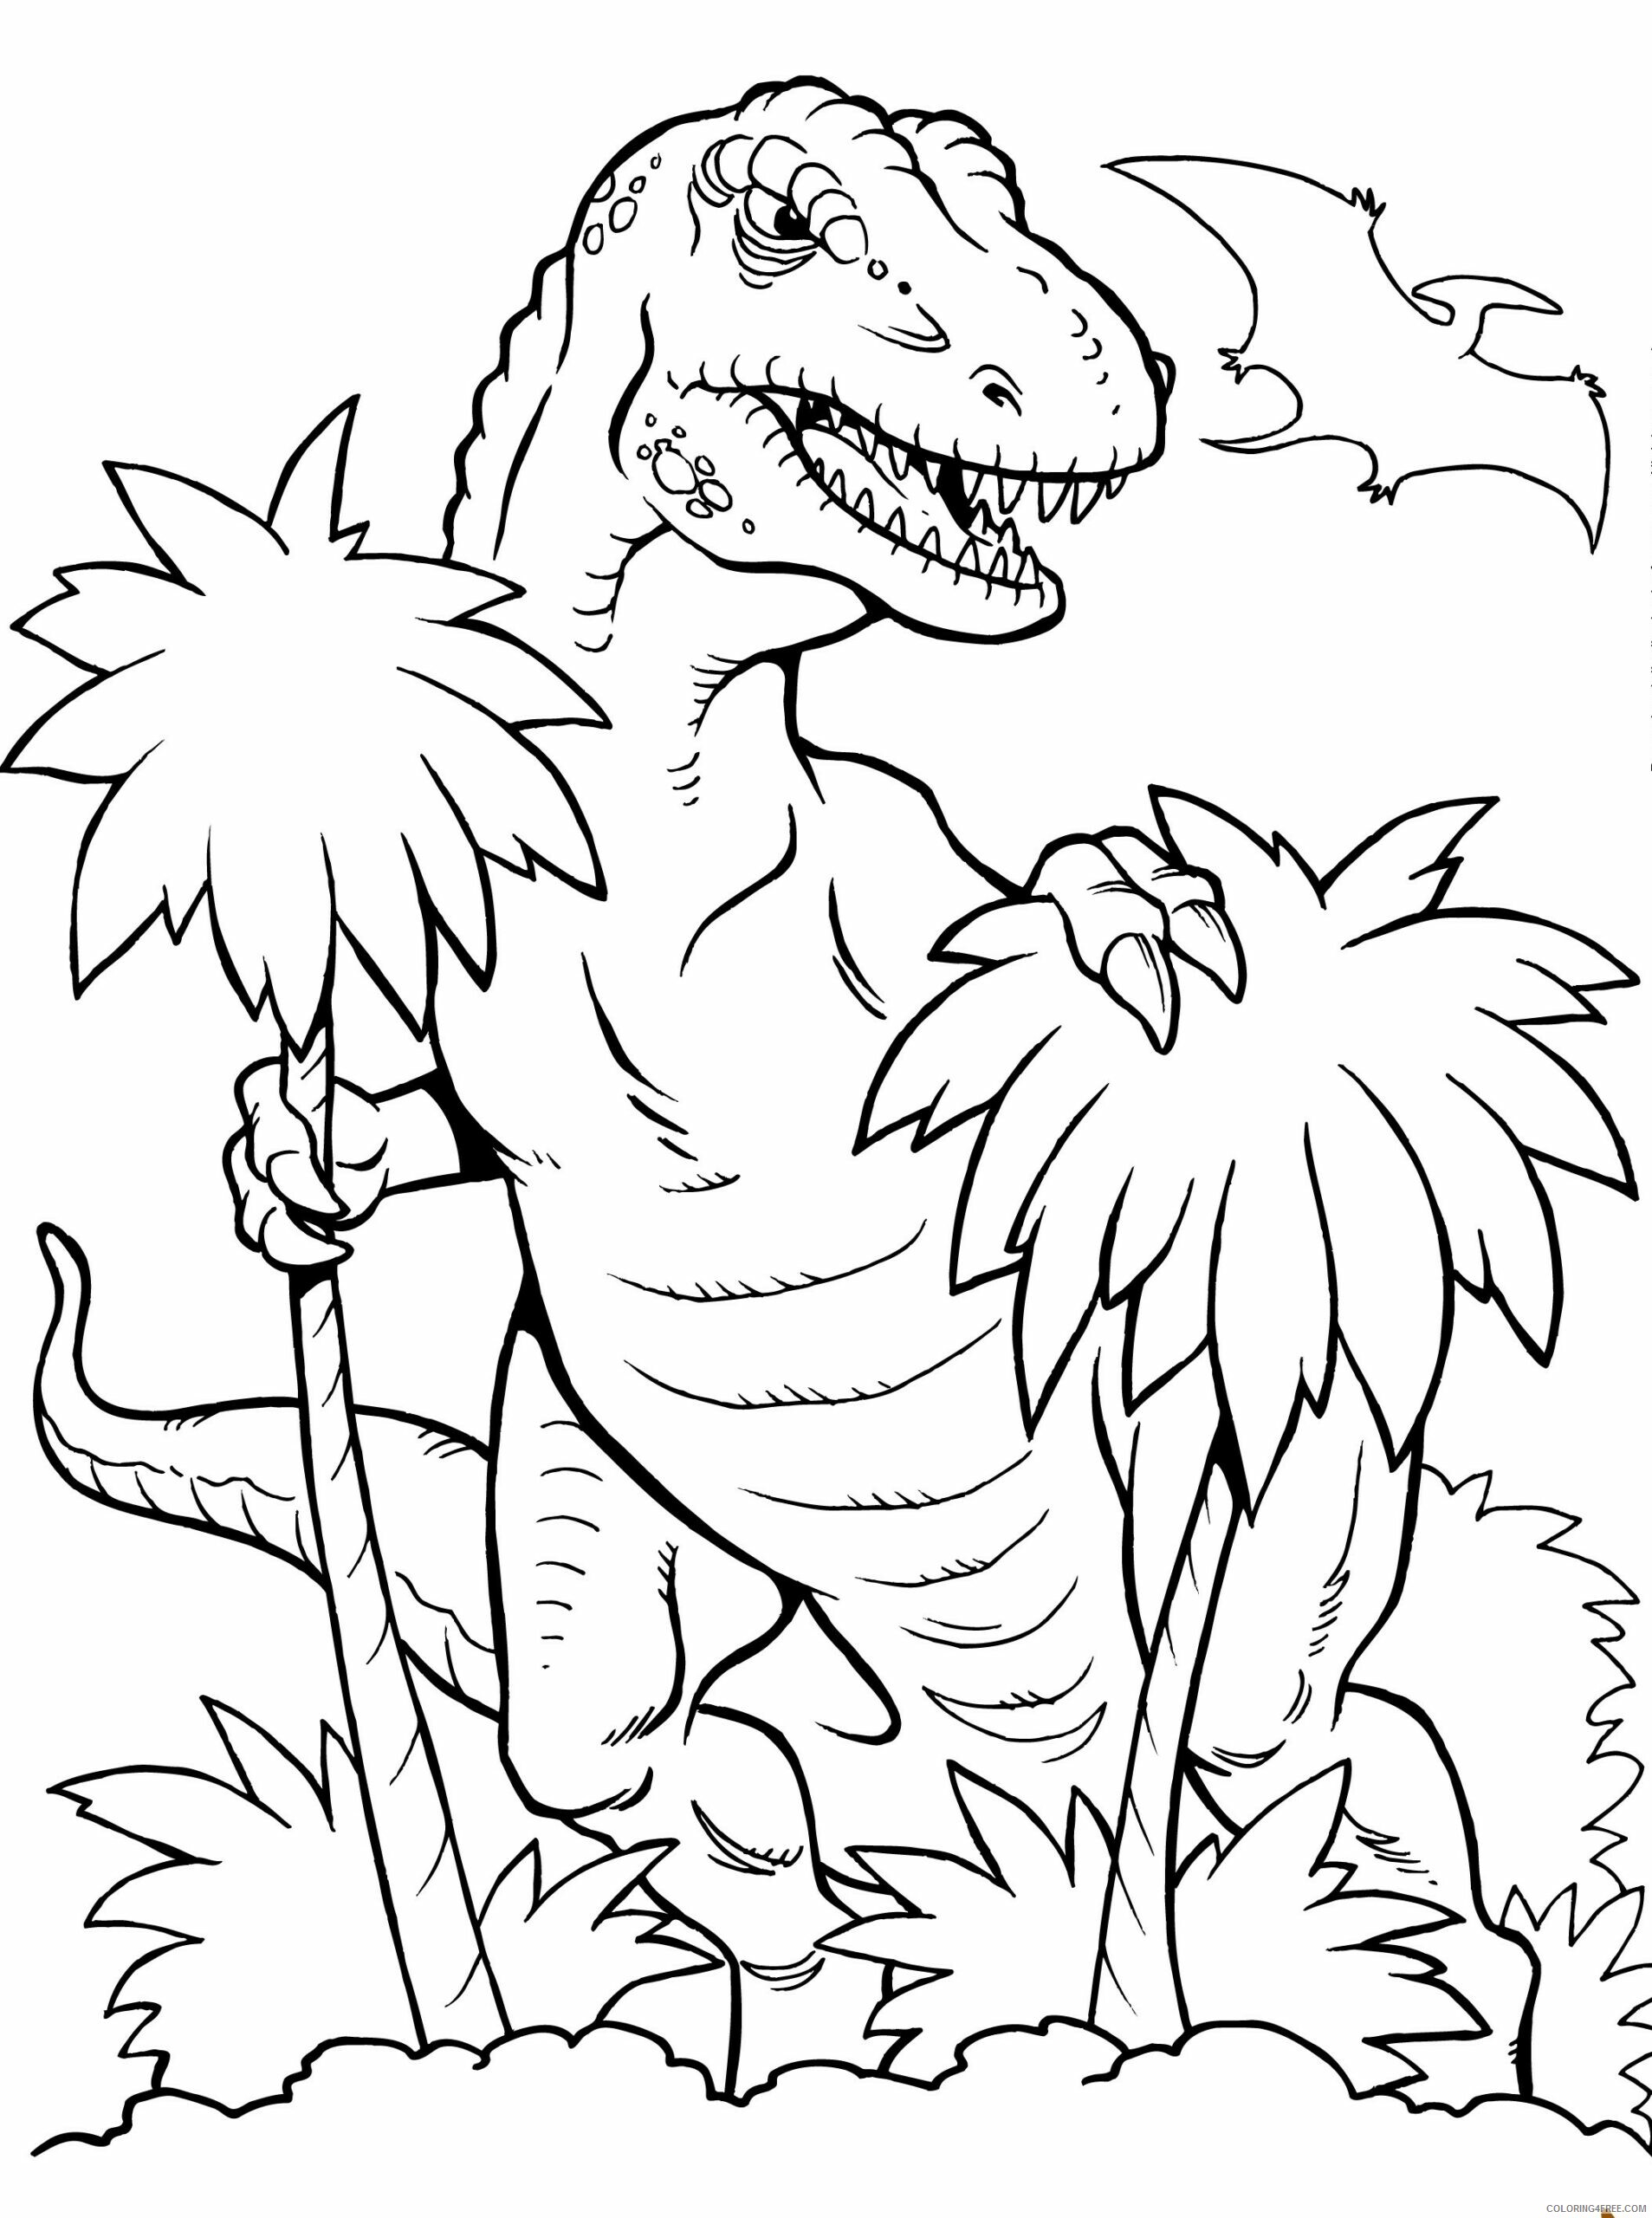 Dinosaurs Coloring Pages for boys T Rex Dinosaurs Printable 2020 0252 Coloring4free